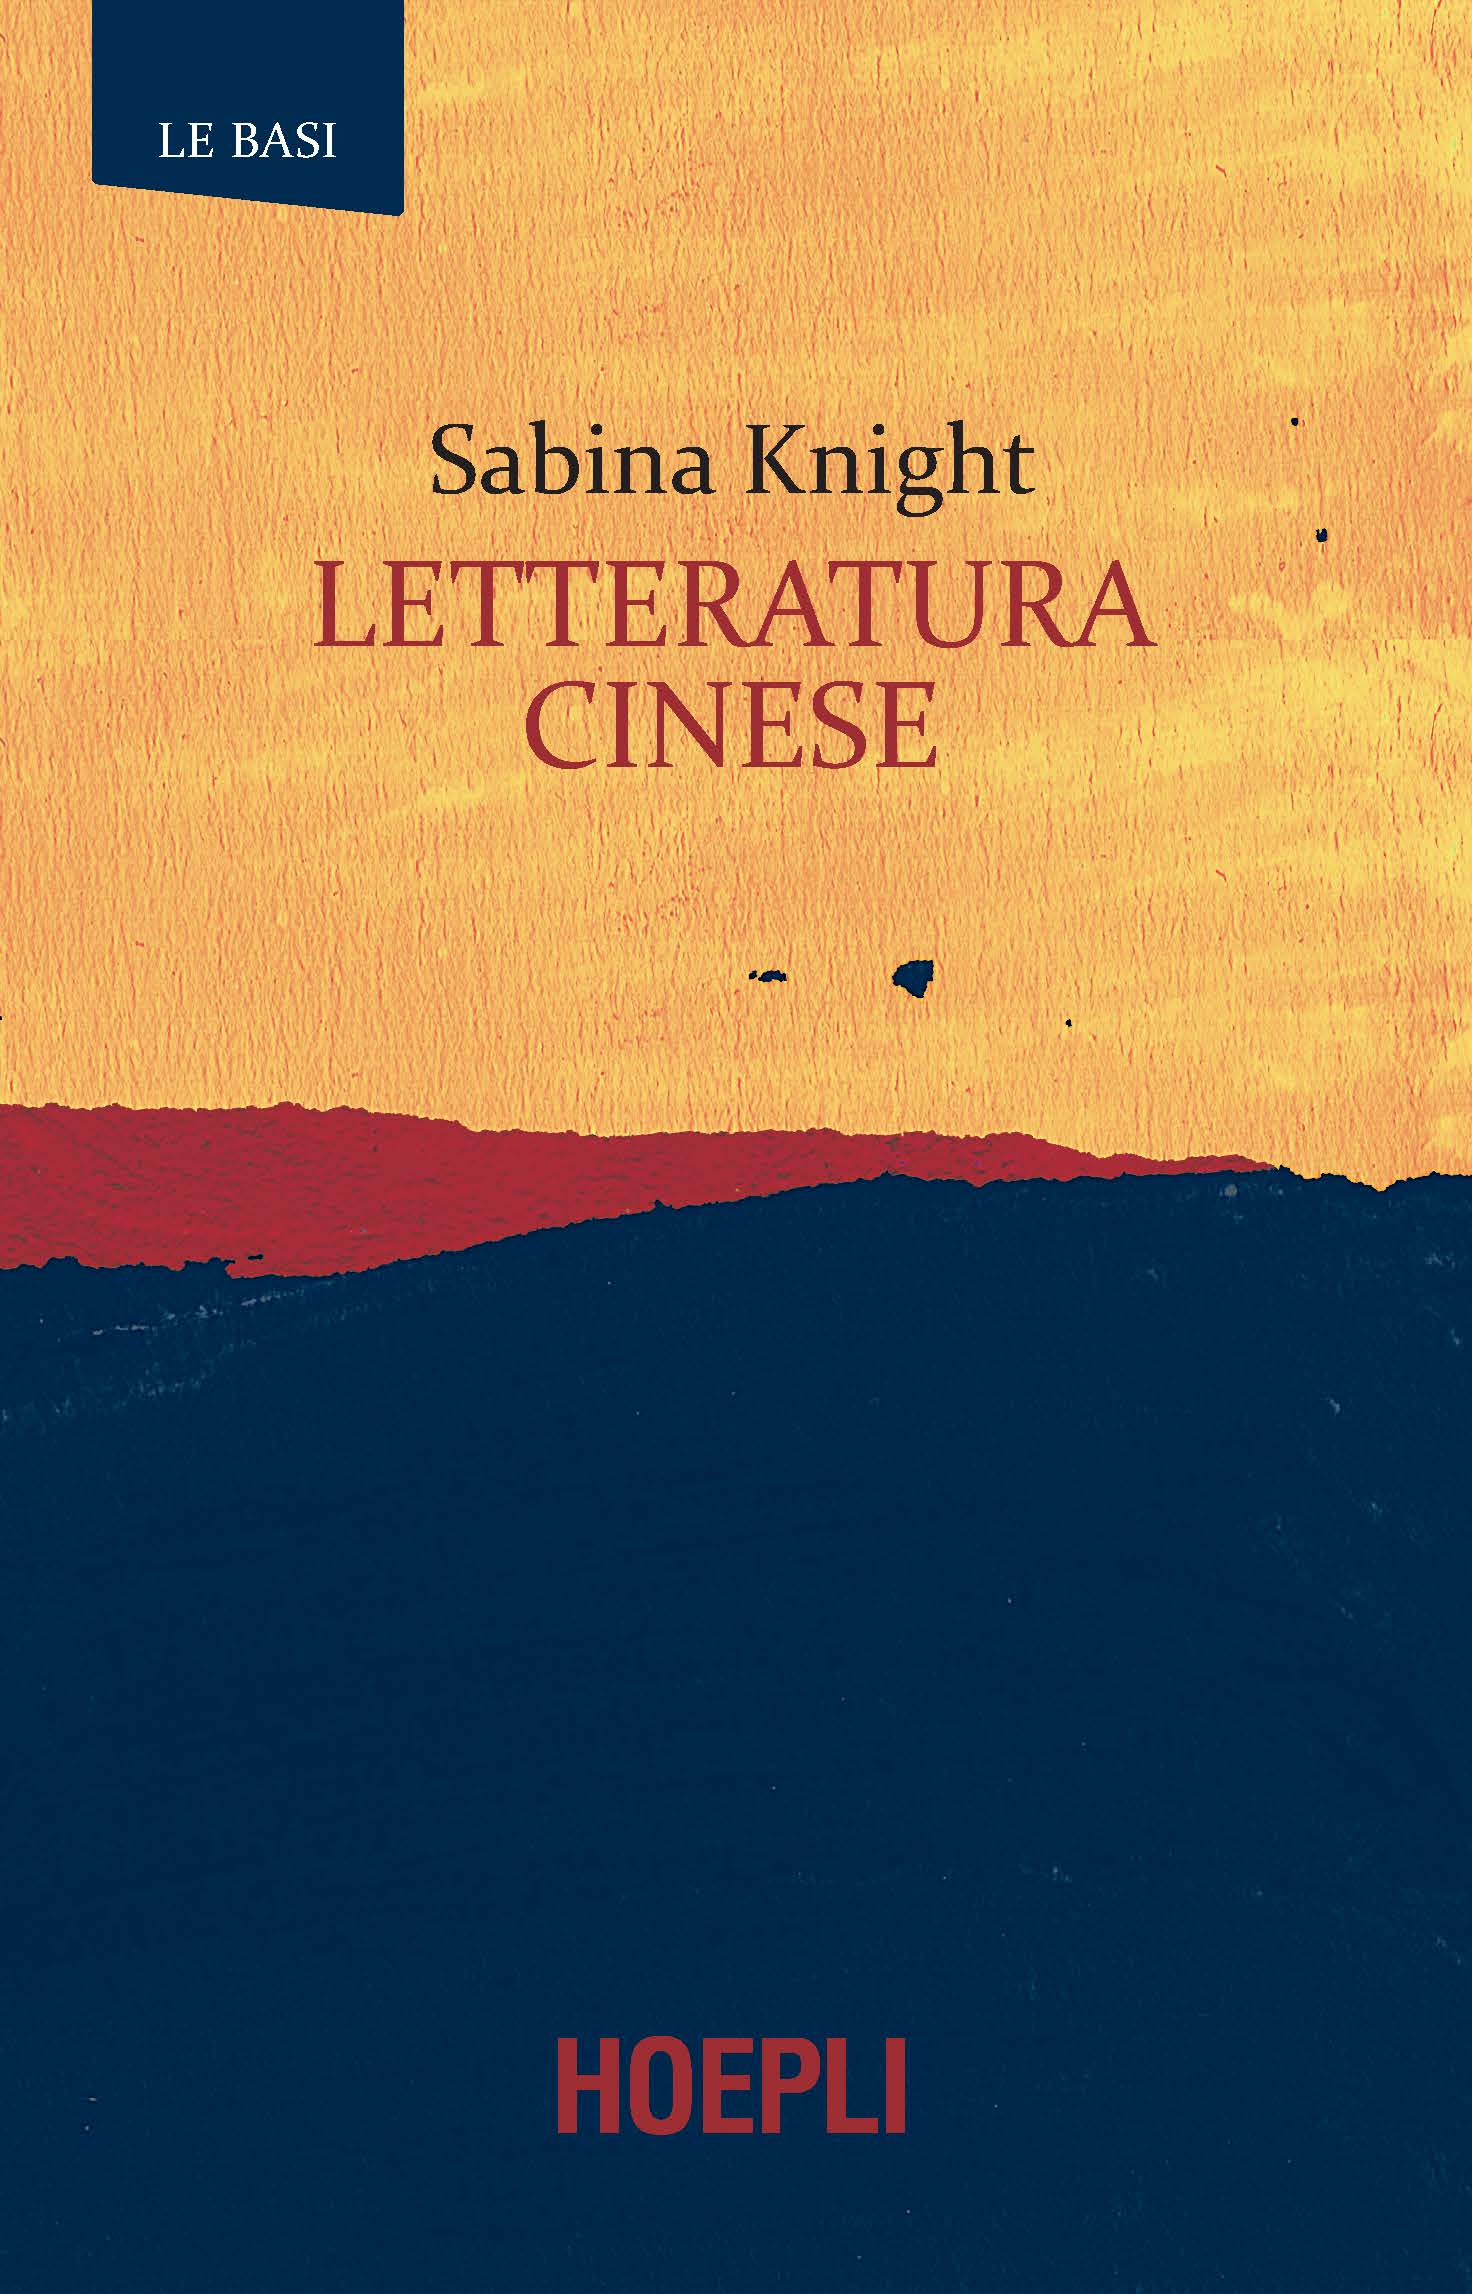 Image of Letteratura cinese